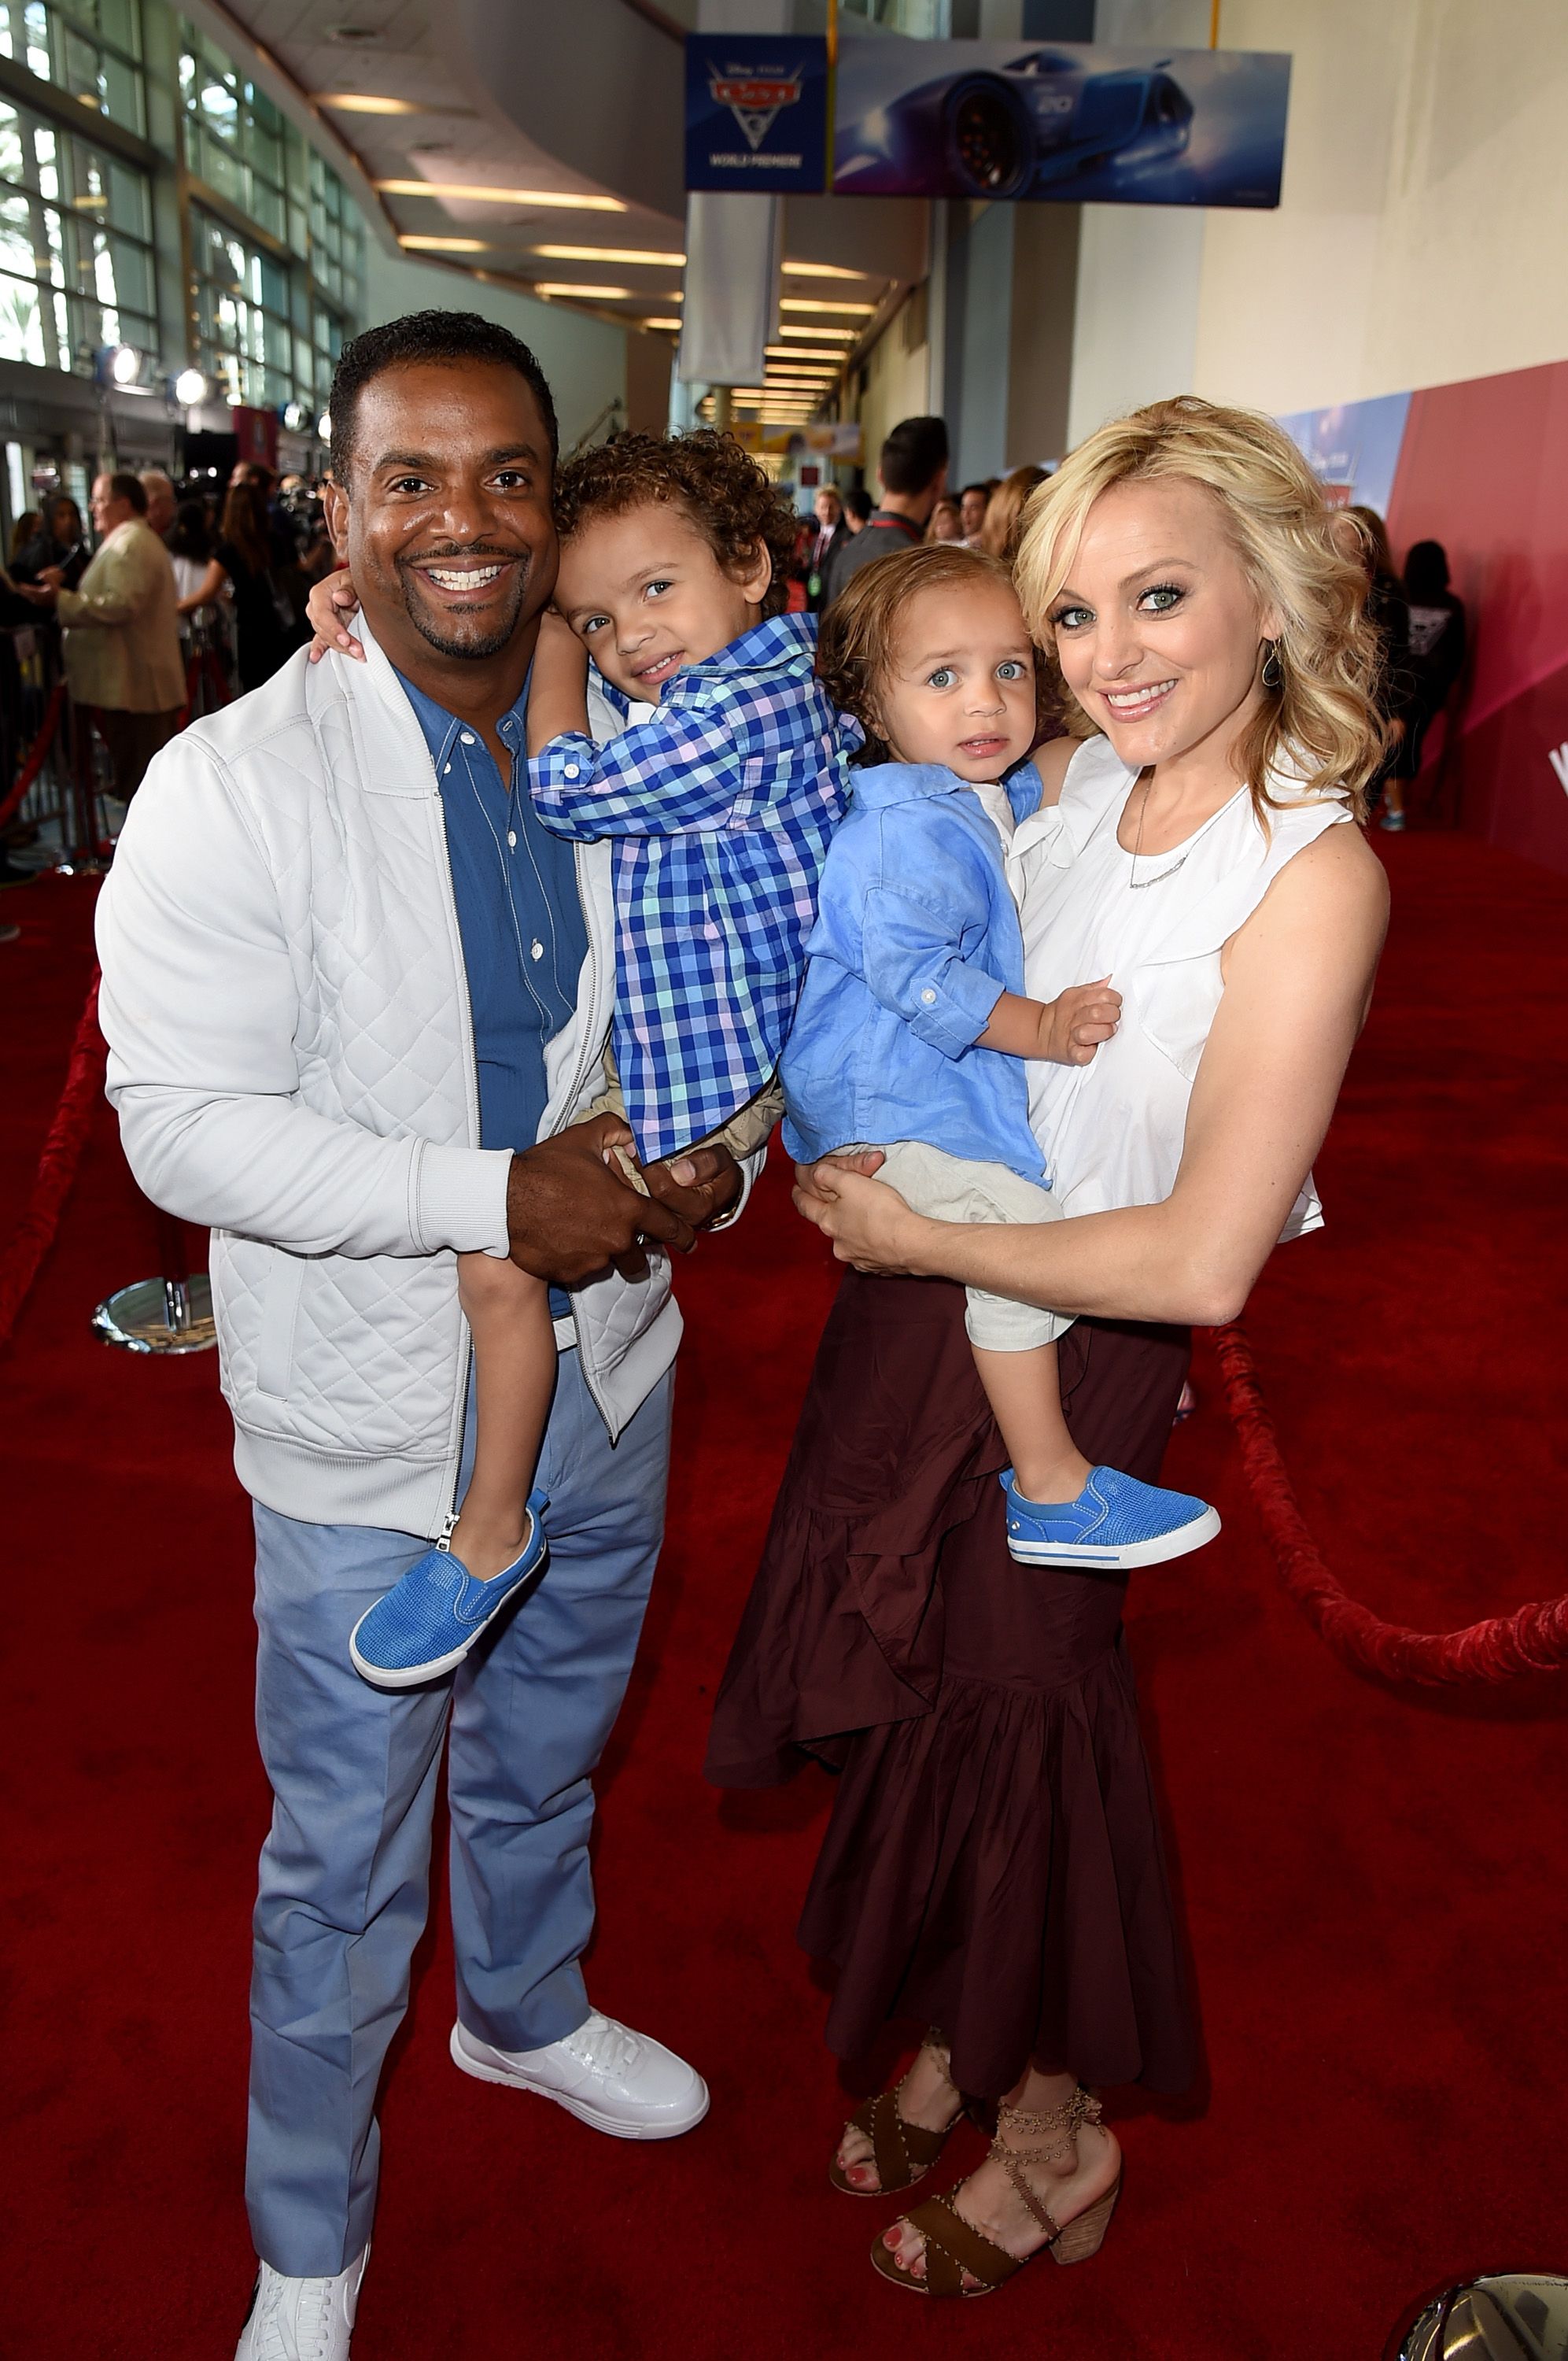 Alfonso Ribeiro Angela Unkrich and family attend the premiere of Disney and Pixar's "Cars 3" 2017| Photo: Getty Images